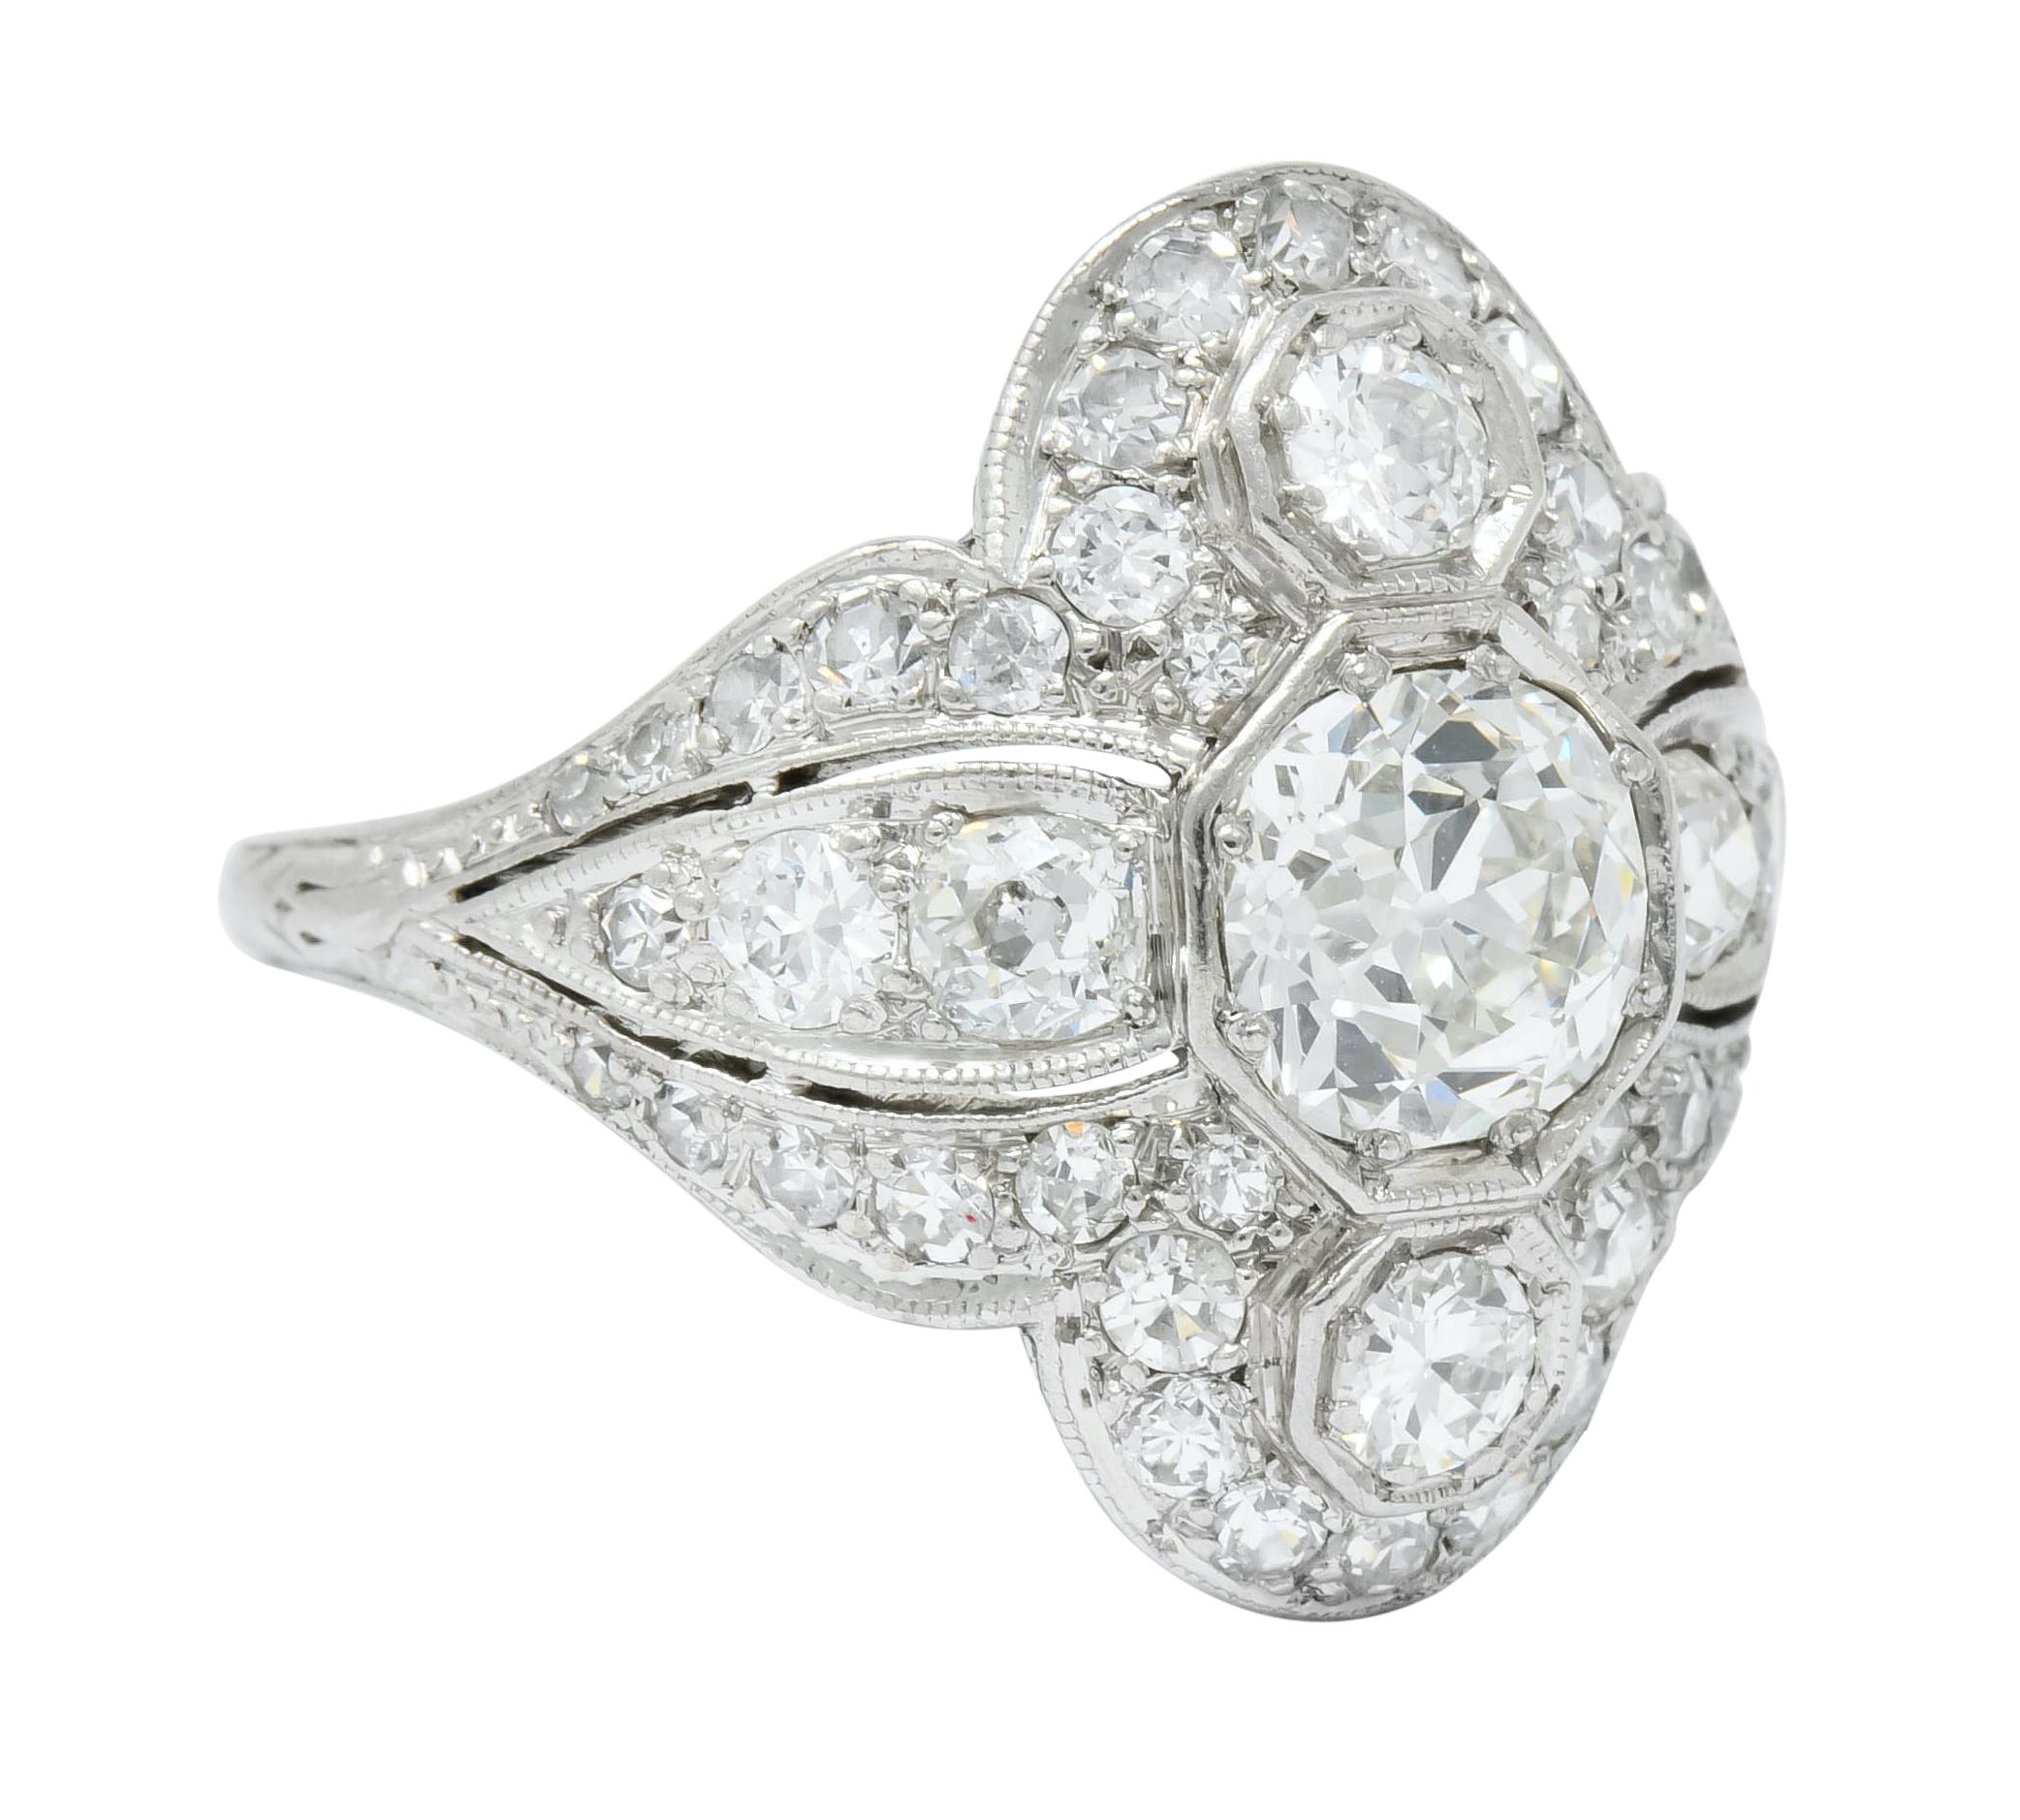 Centering three old European cut diamonds, bead set North to South, weighing in total 1.40 carats, I/J color and VS clarity

Surrounded by old European cut, single cut, and transitional cut diamonds weighing approximately 1.20 carats total, H to J